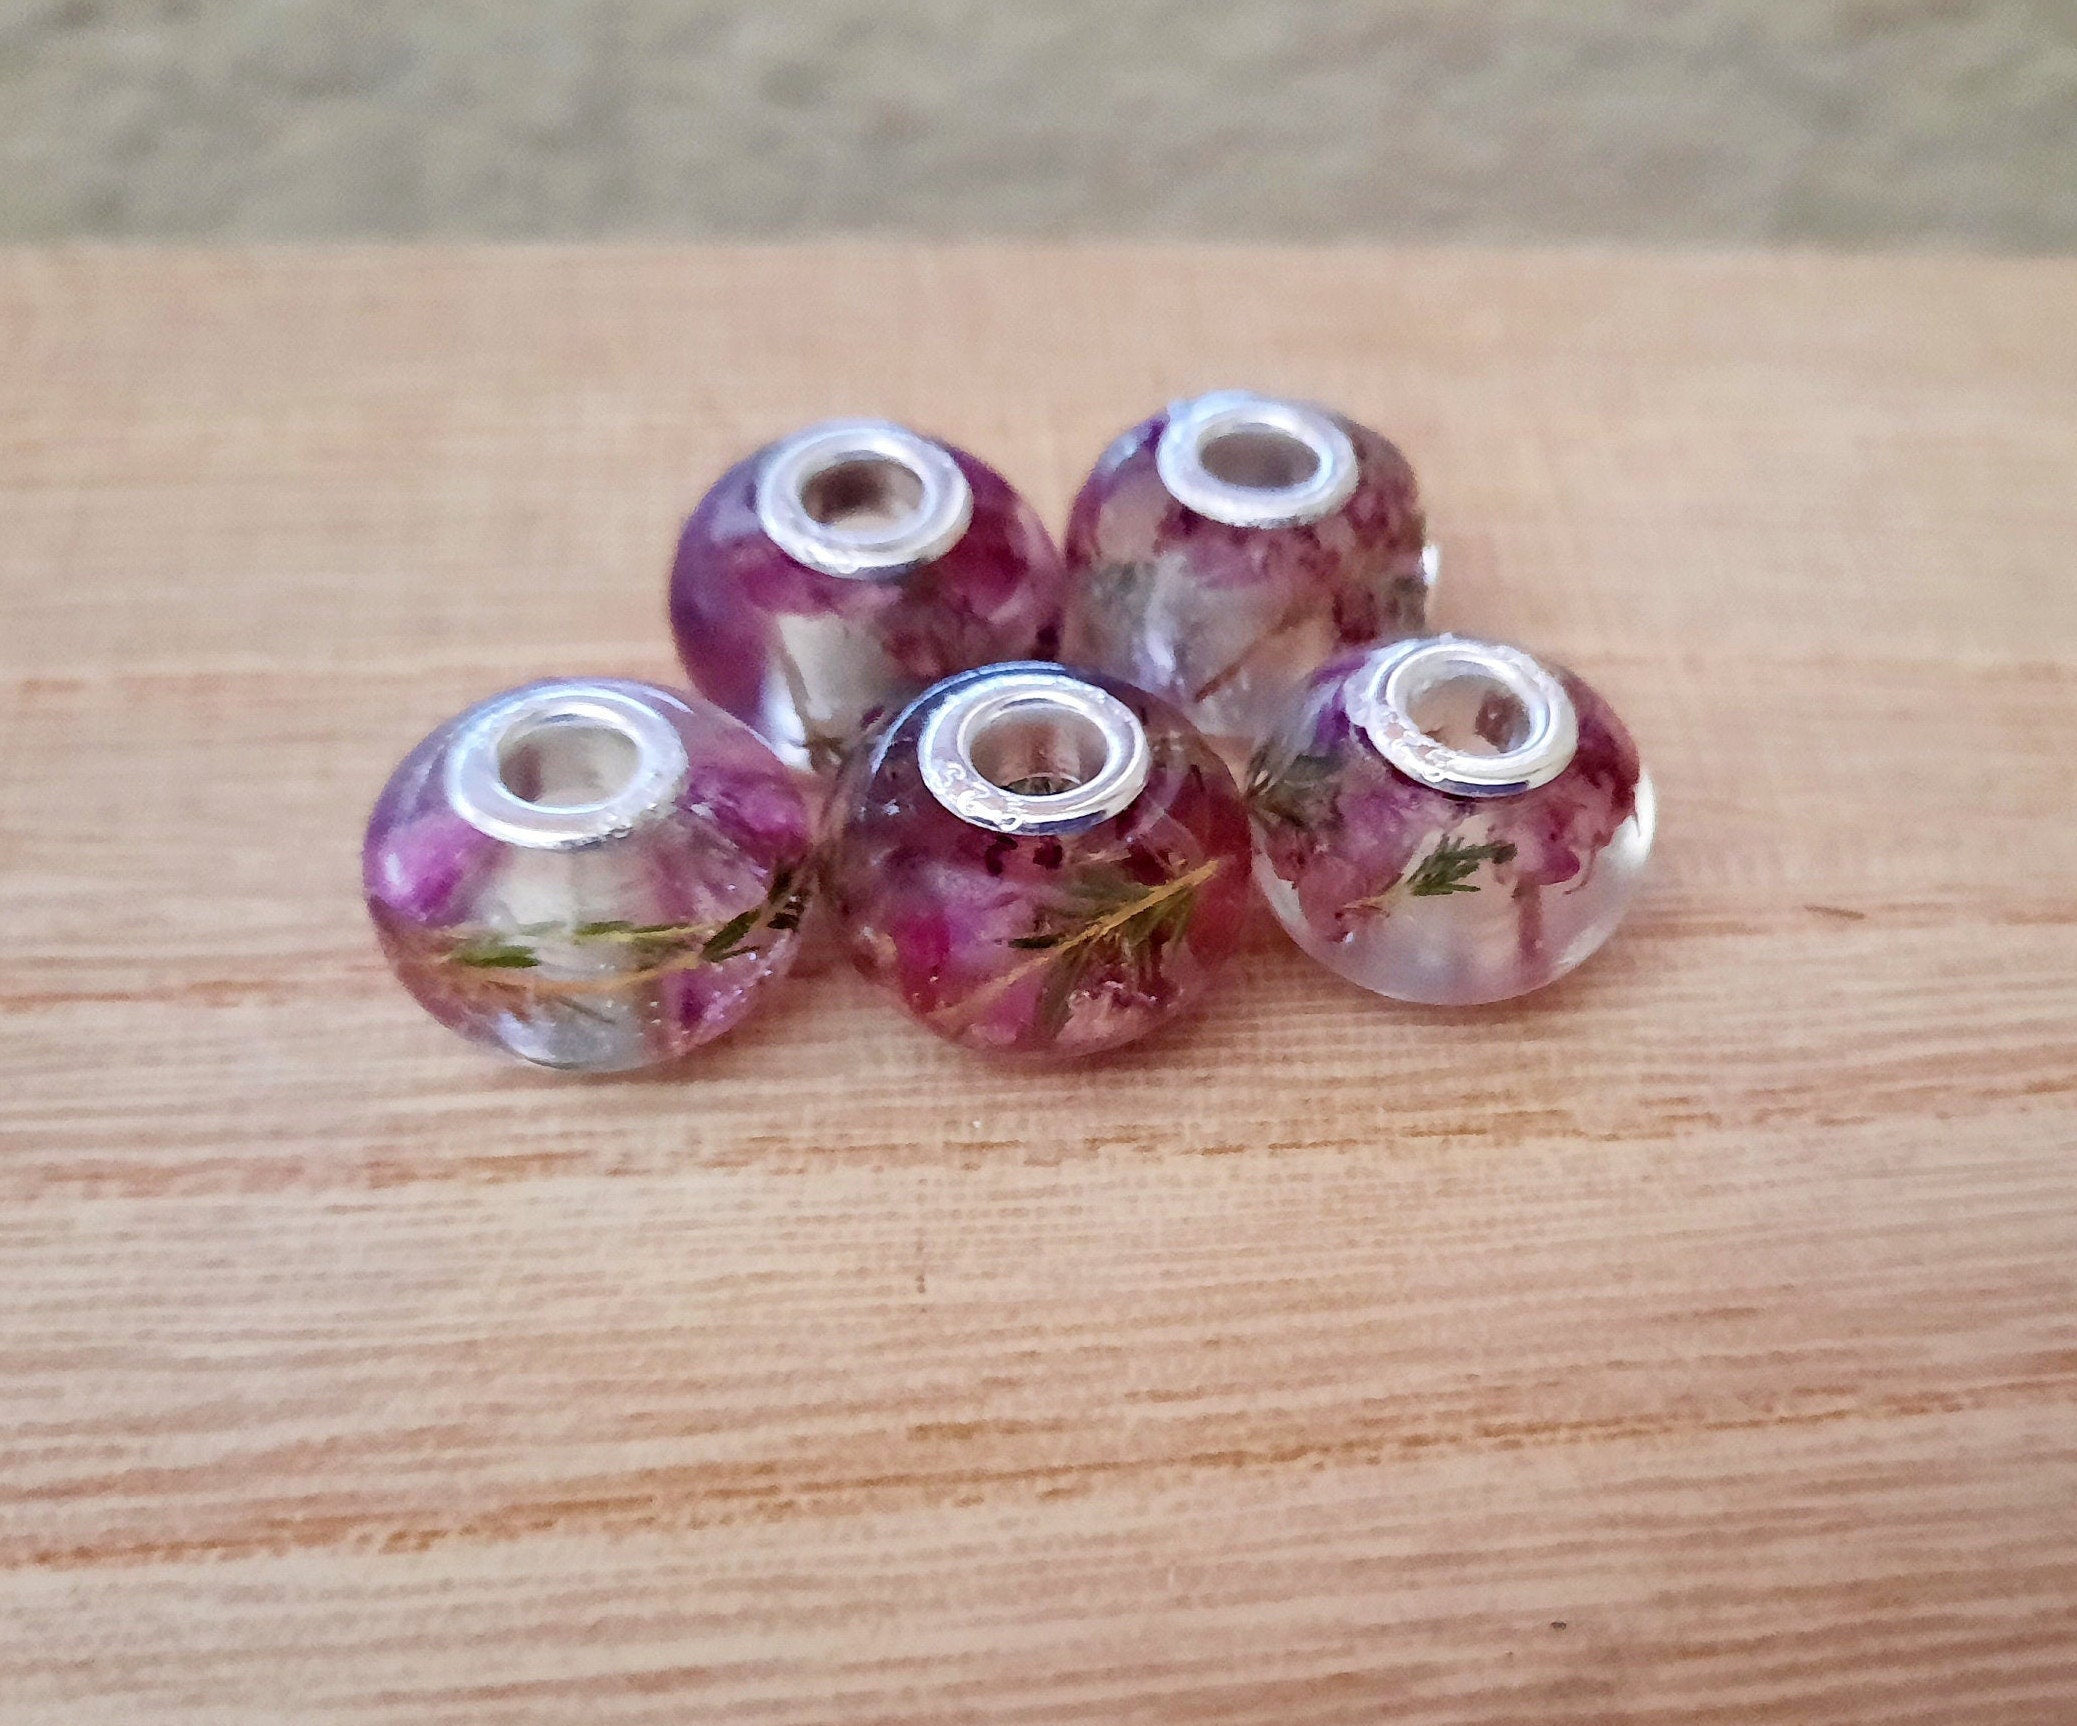 Resin Charm Bead Round - Flower Petal Jewelry Funeral Memory Beads